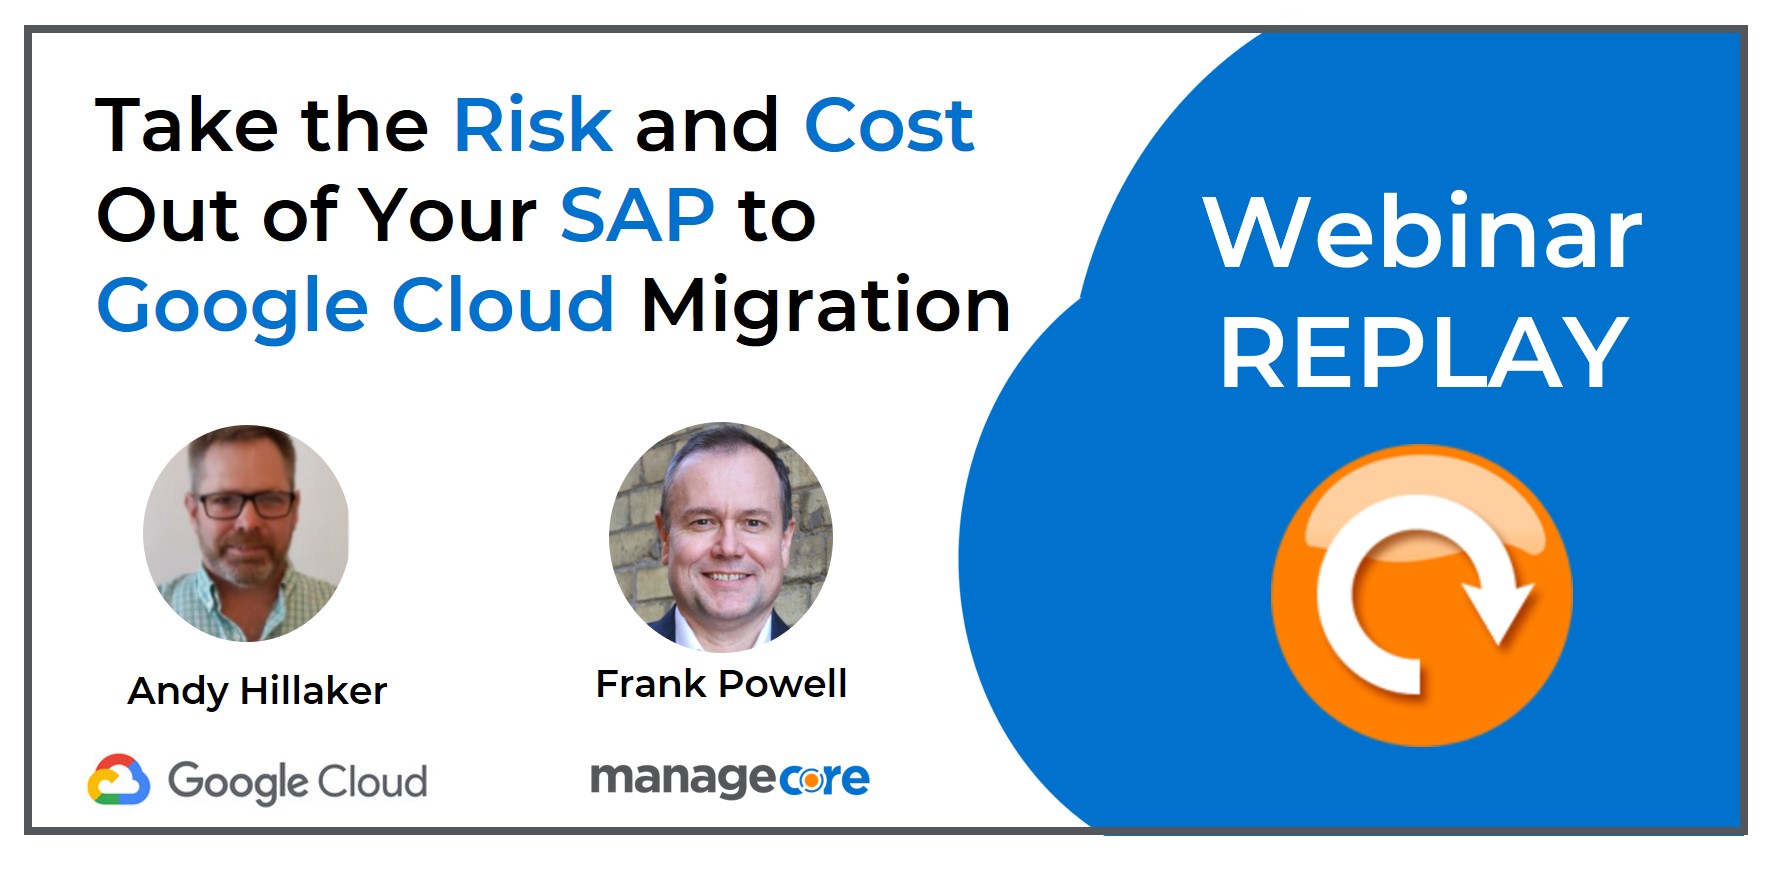 [Webinar] Take the Risk and Cost Out of your SAP to Google Cloud Migration